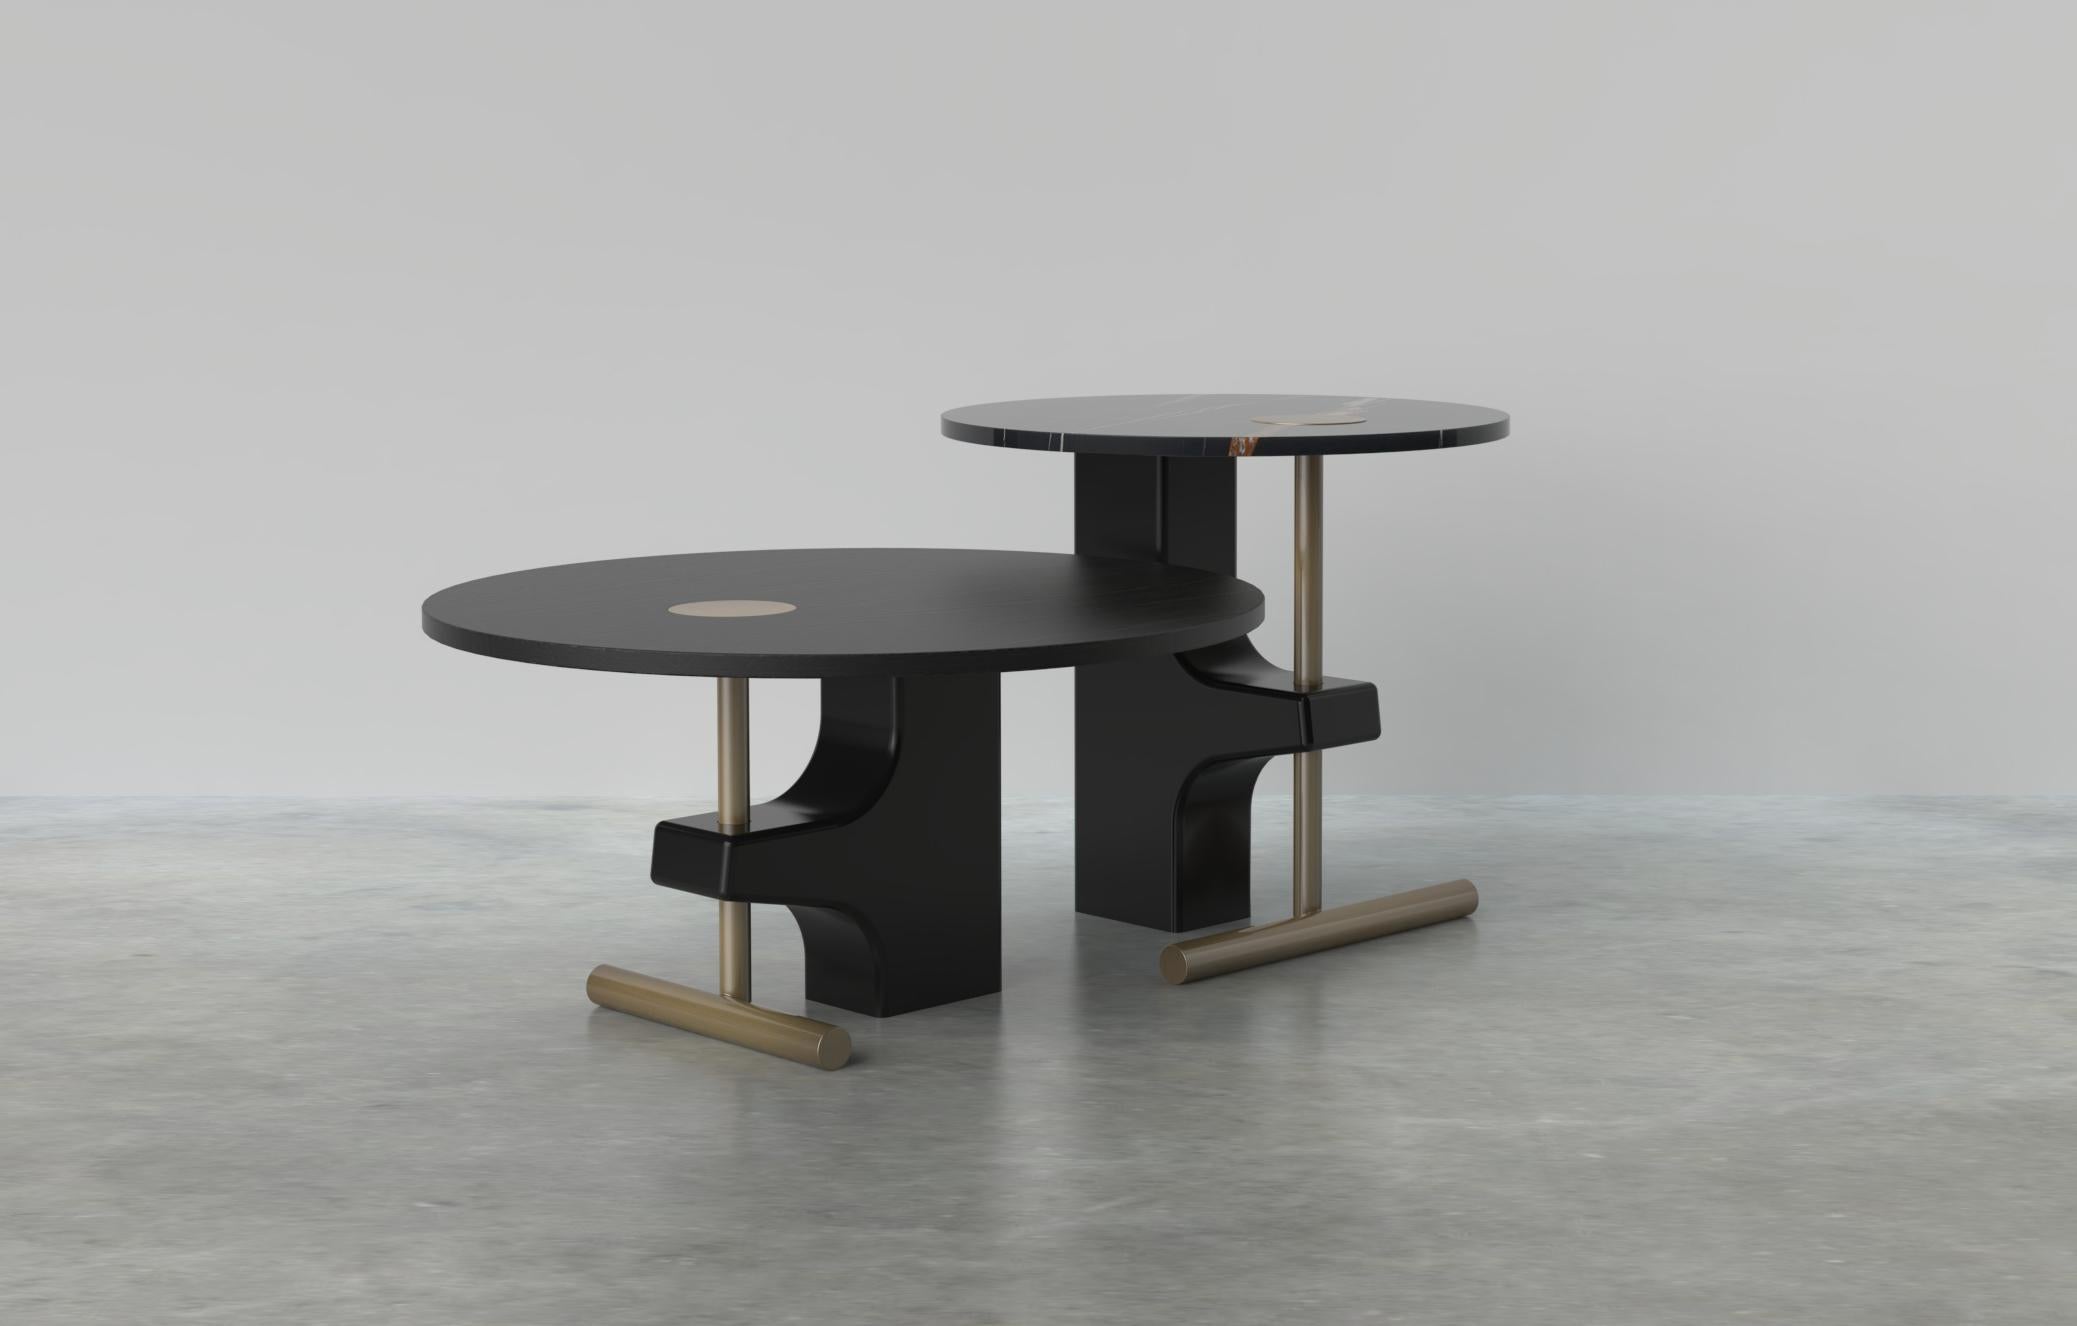 Set of 2 Mó Coffee Tables, Contemporary Collection, Handcrafted in Portugal - Europe by Greenapple.

The Mó marble coffee table pays homage to the ancient celebrations during the summer solstice, a time when millstones held a sacred significance in